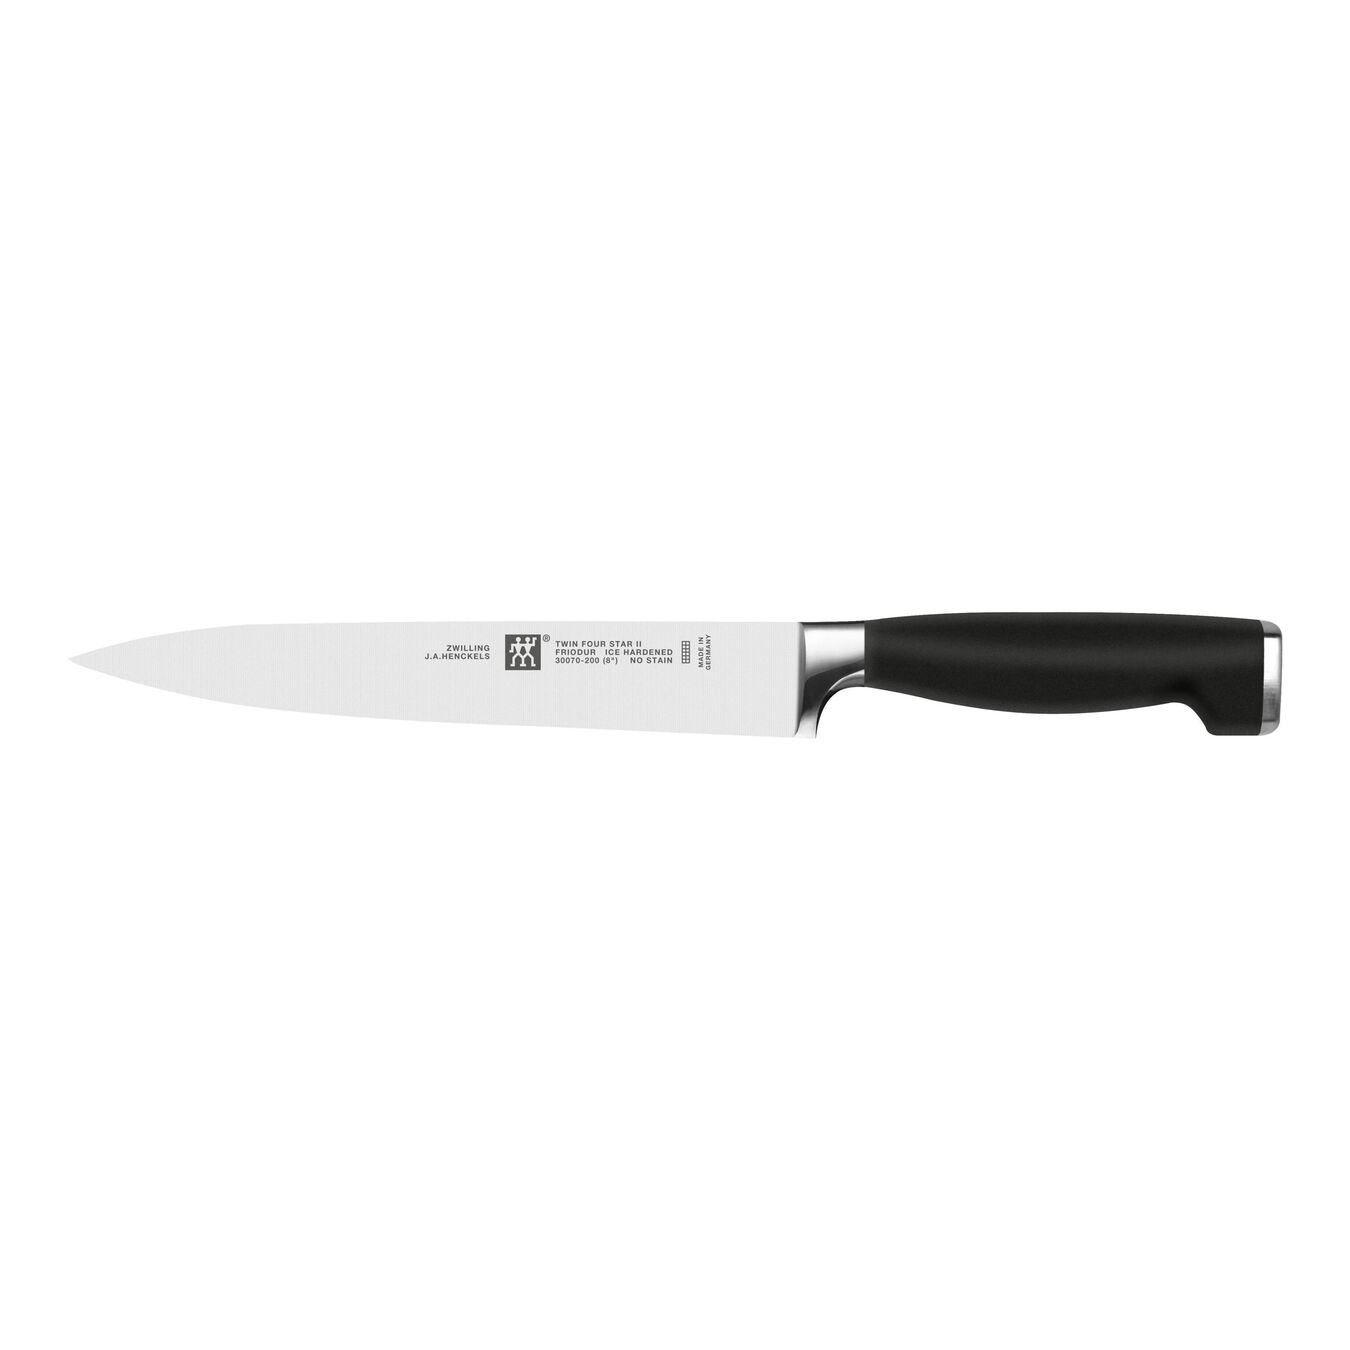 8 inch Carving knife,,large 1